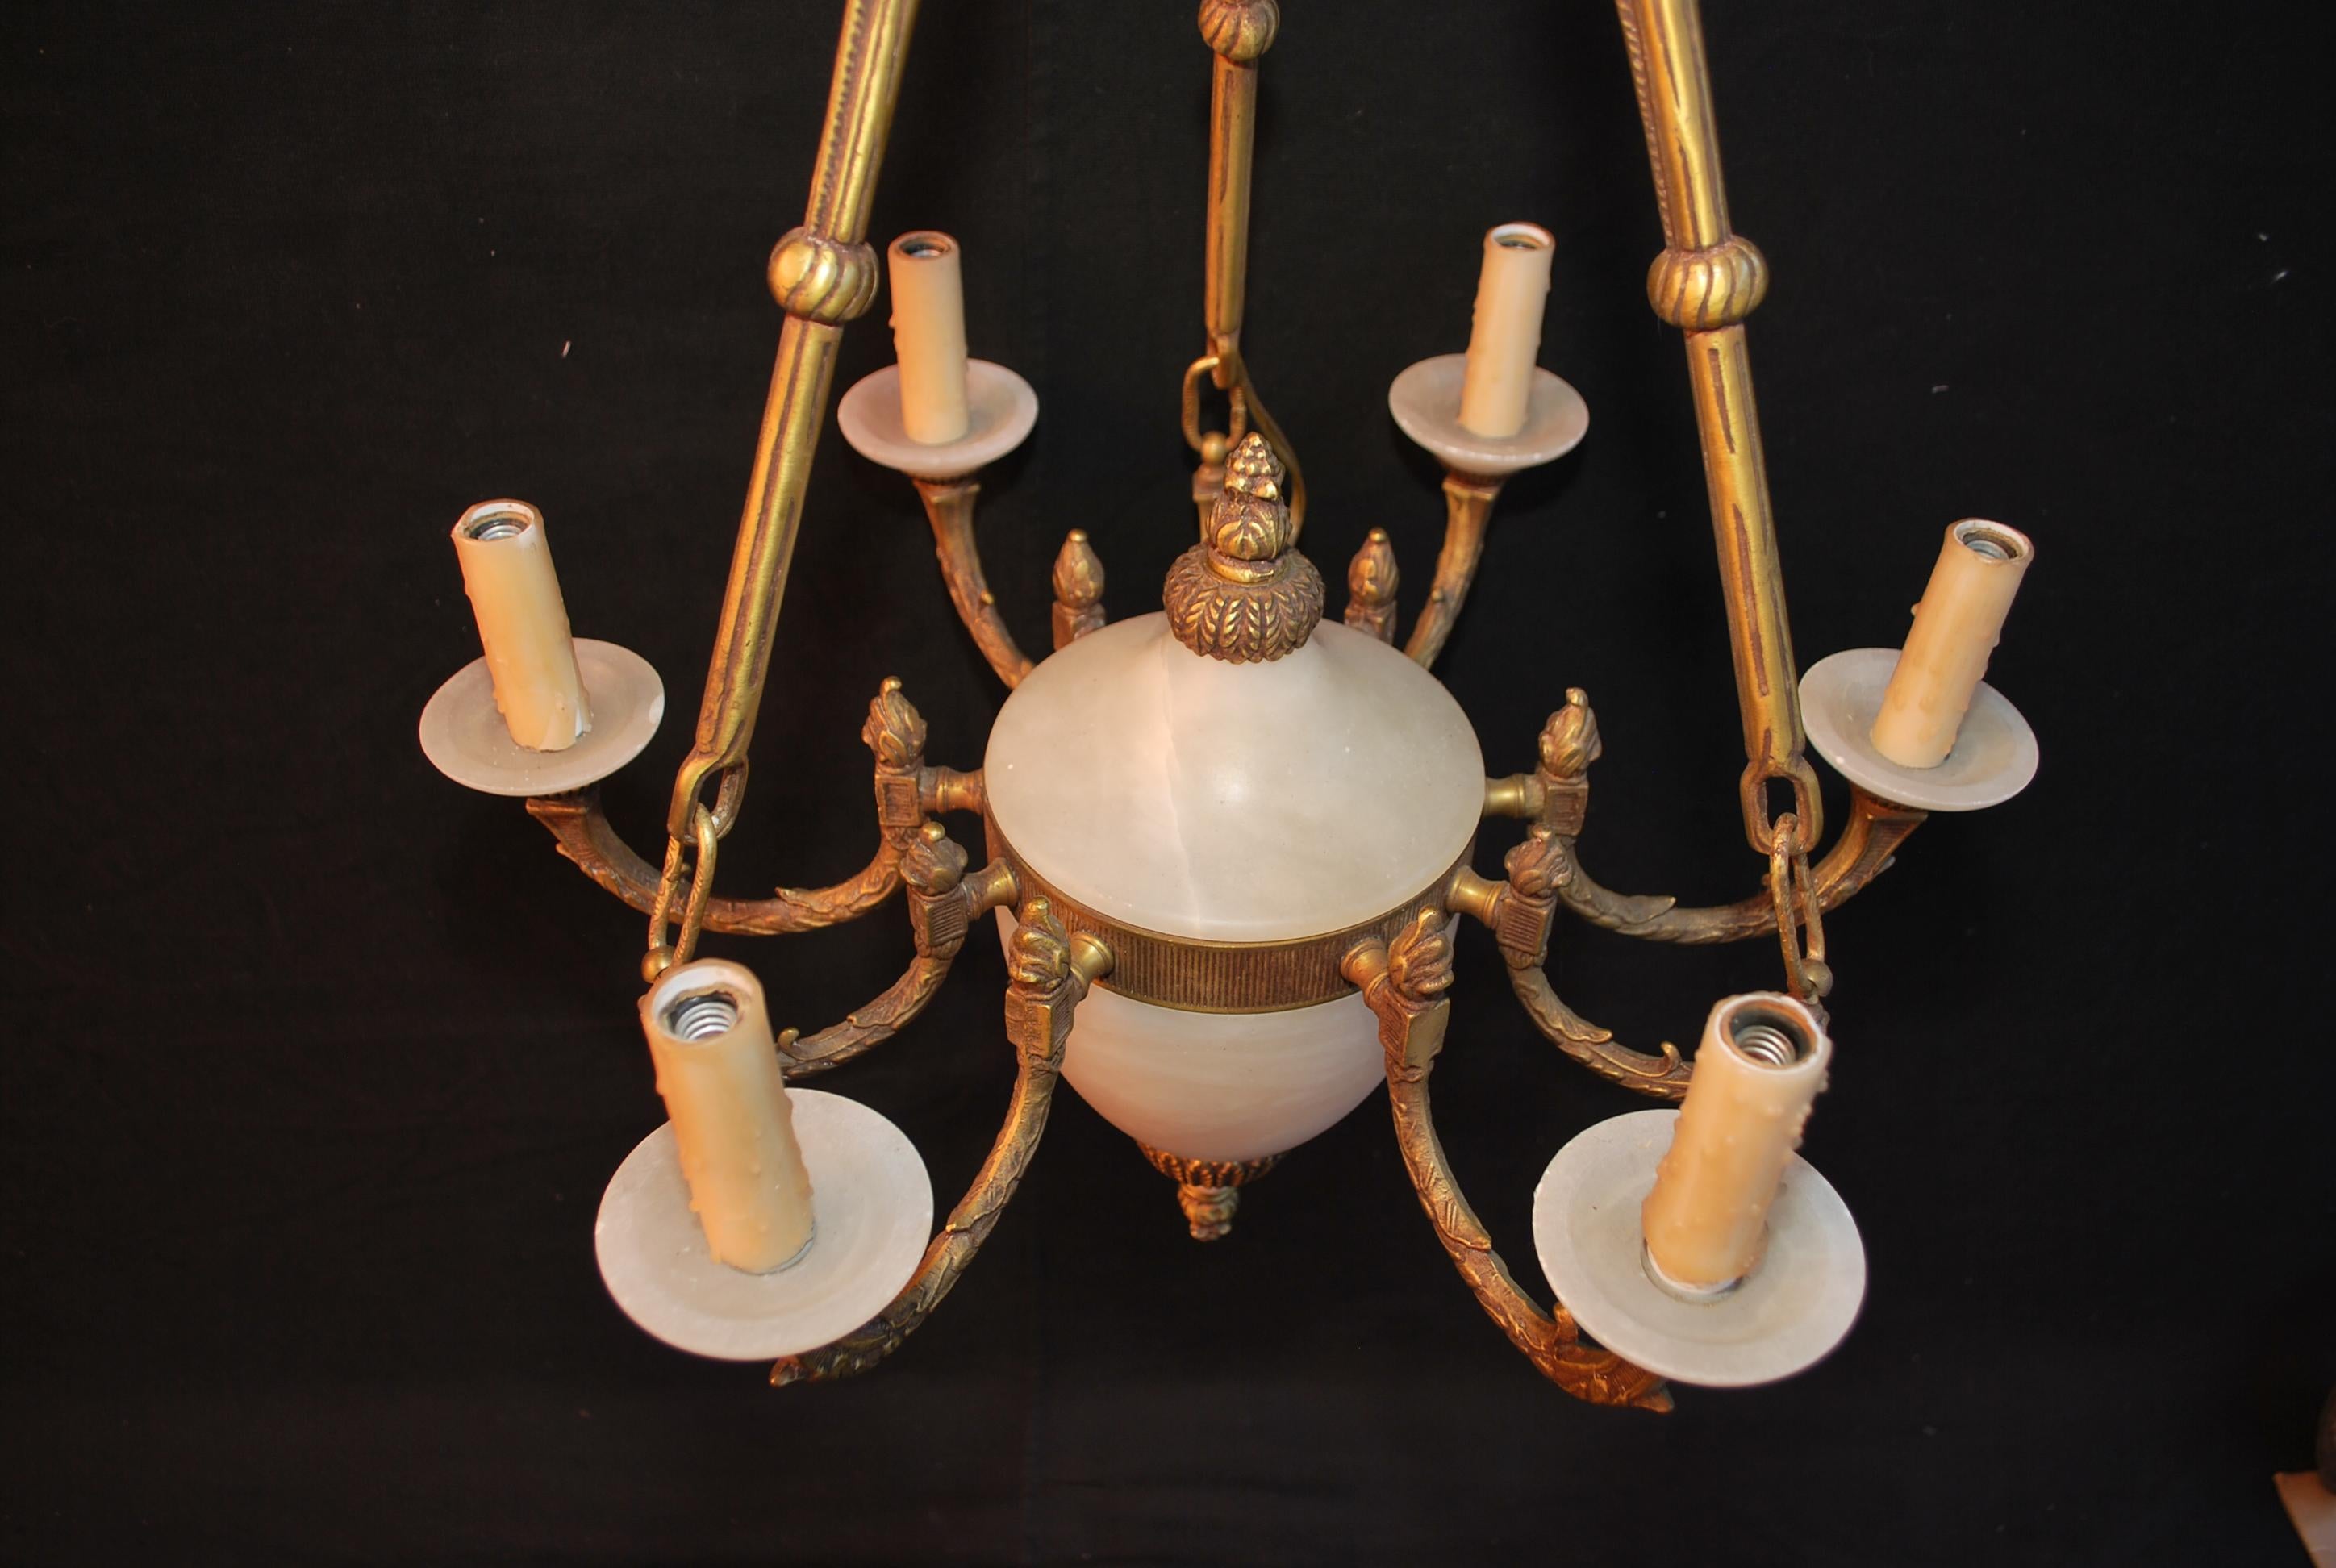  A beautiful and elegant Italian marble chandelier, the patina is allot nicer in person